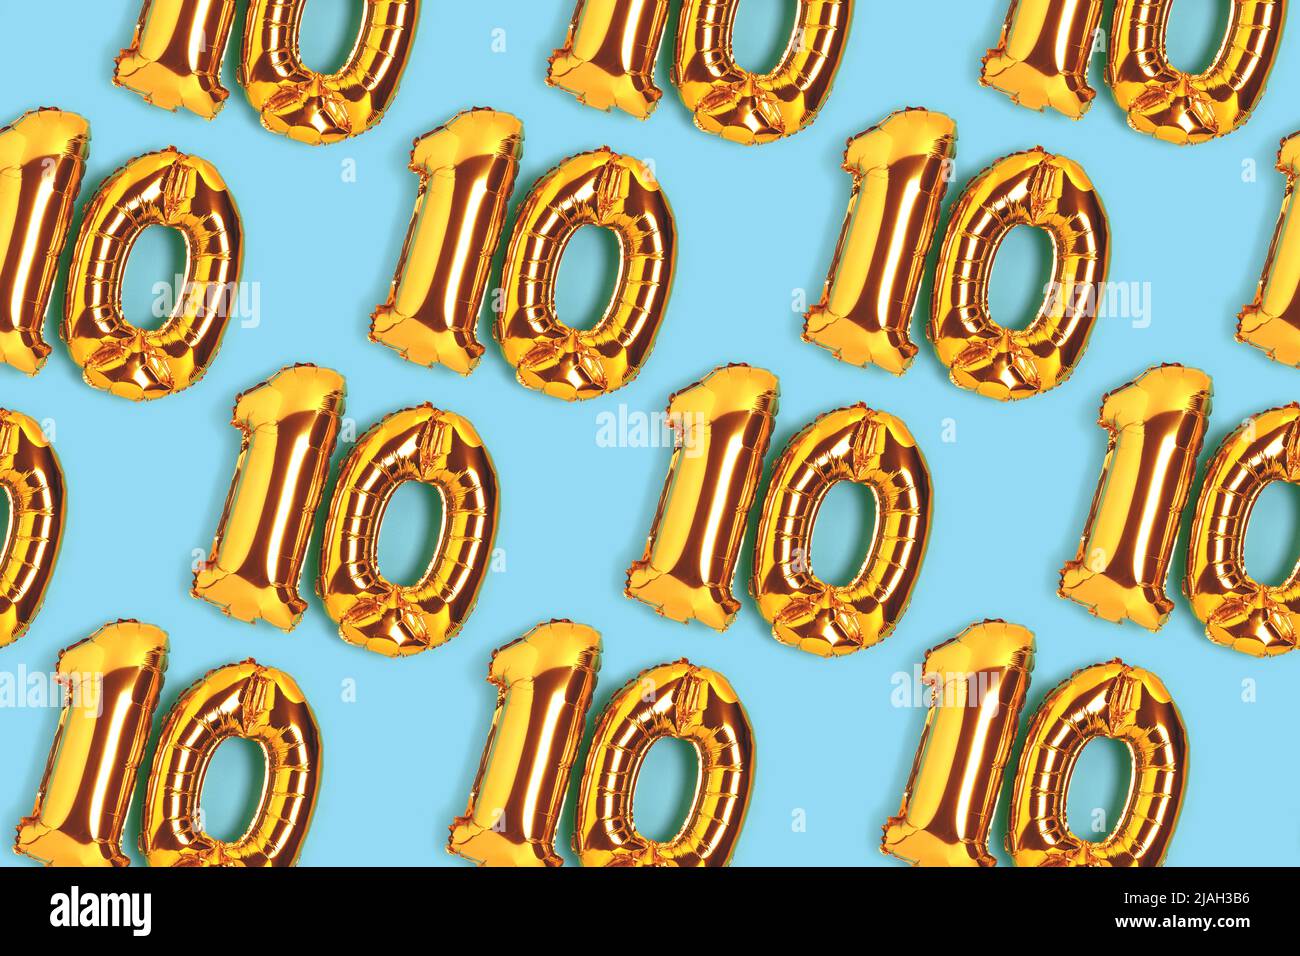 Number 10 golden balloons pattern. Ten years anniversary celebration concept on a blue background. Stock Photo